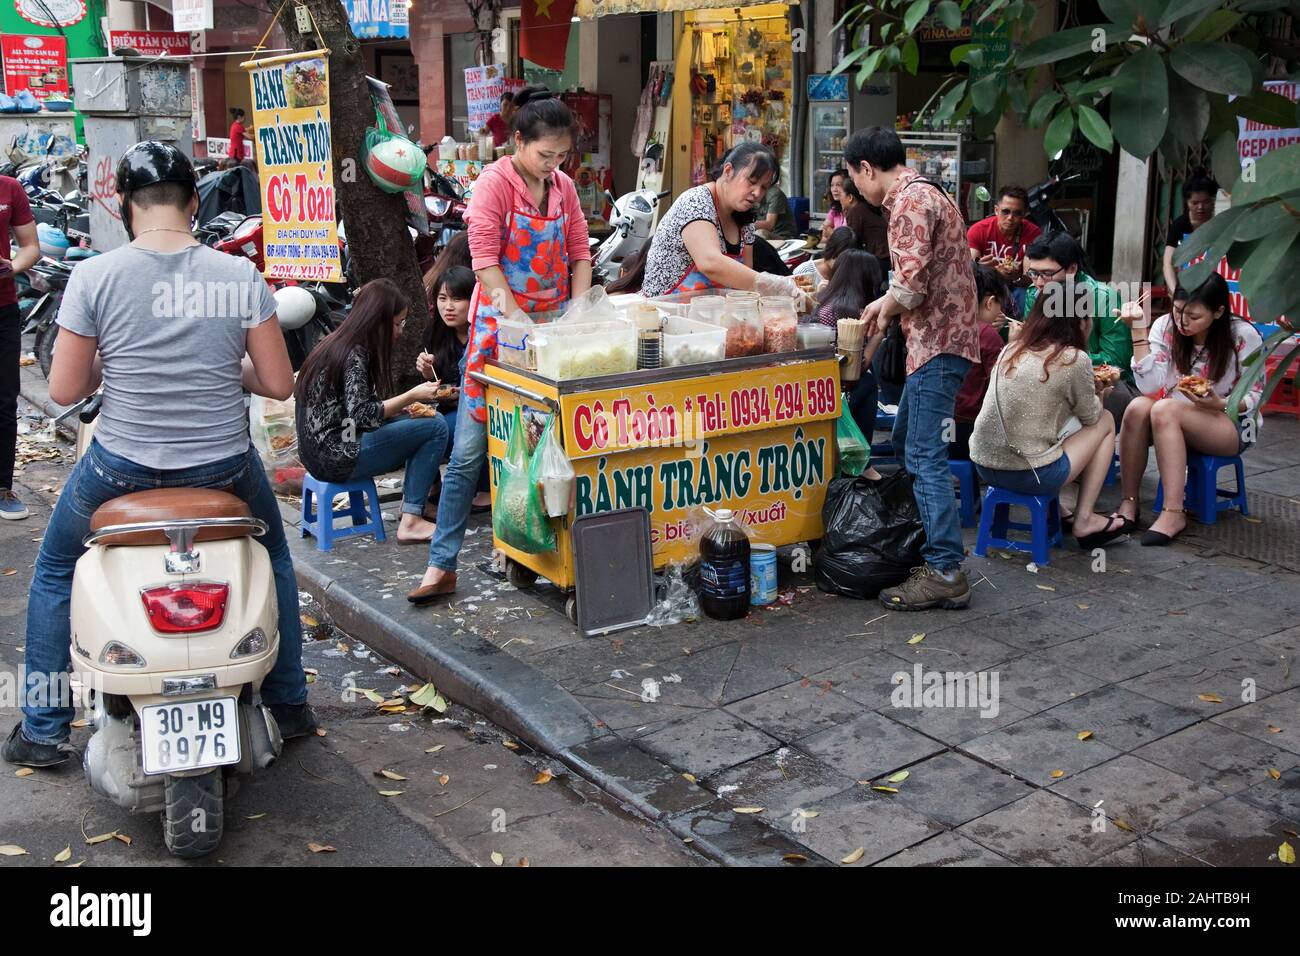 Asian people sitting on small chairs eat their lunch together at a fast food vendor Stock Photo